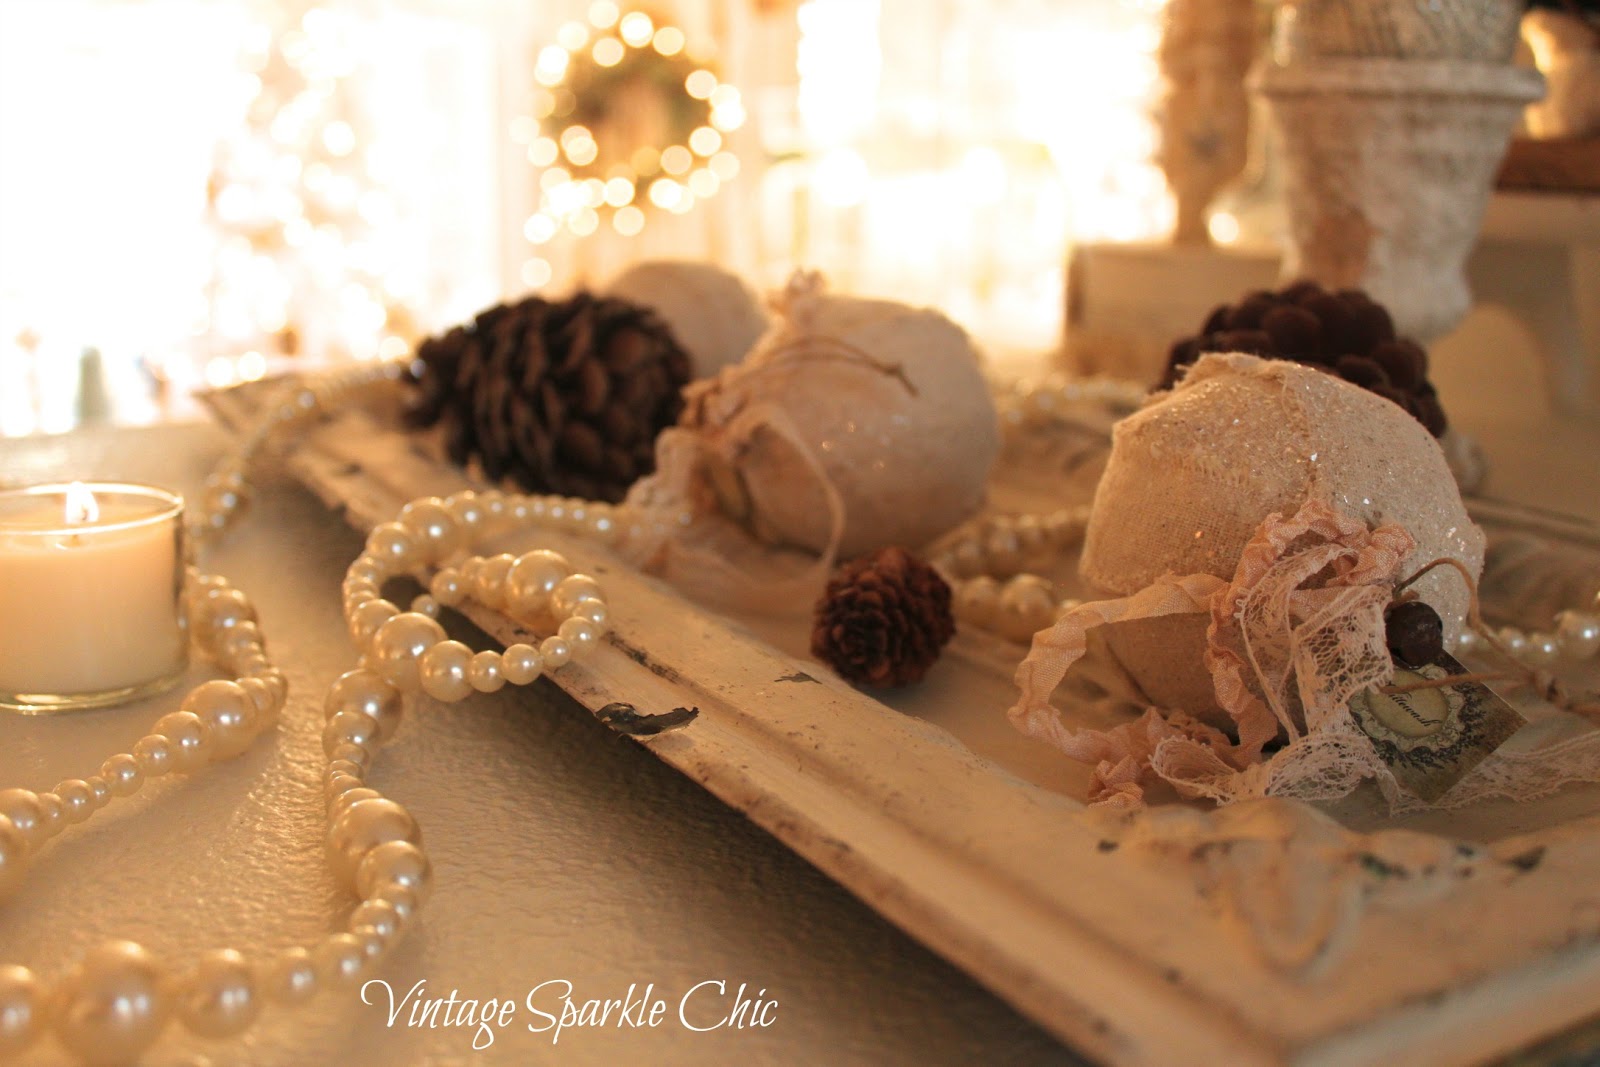 Vintage Sparkle Chic: French Shabby Christmas decorations